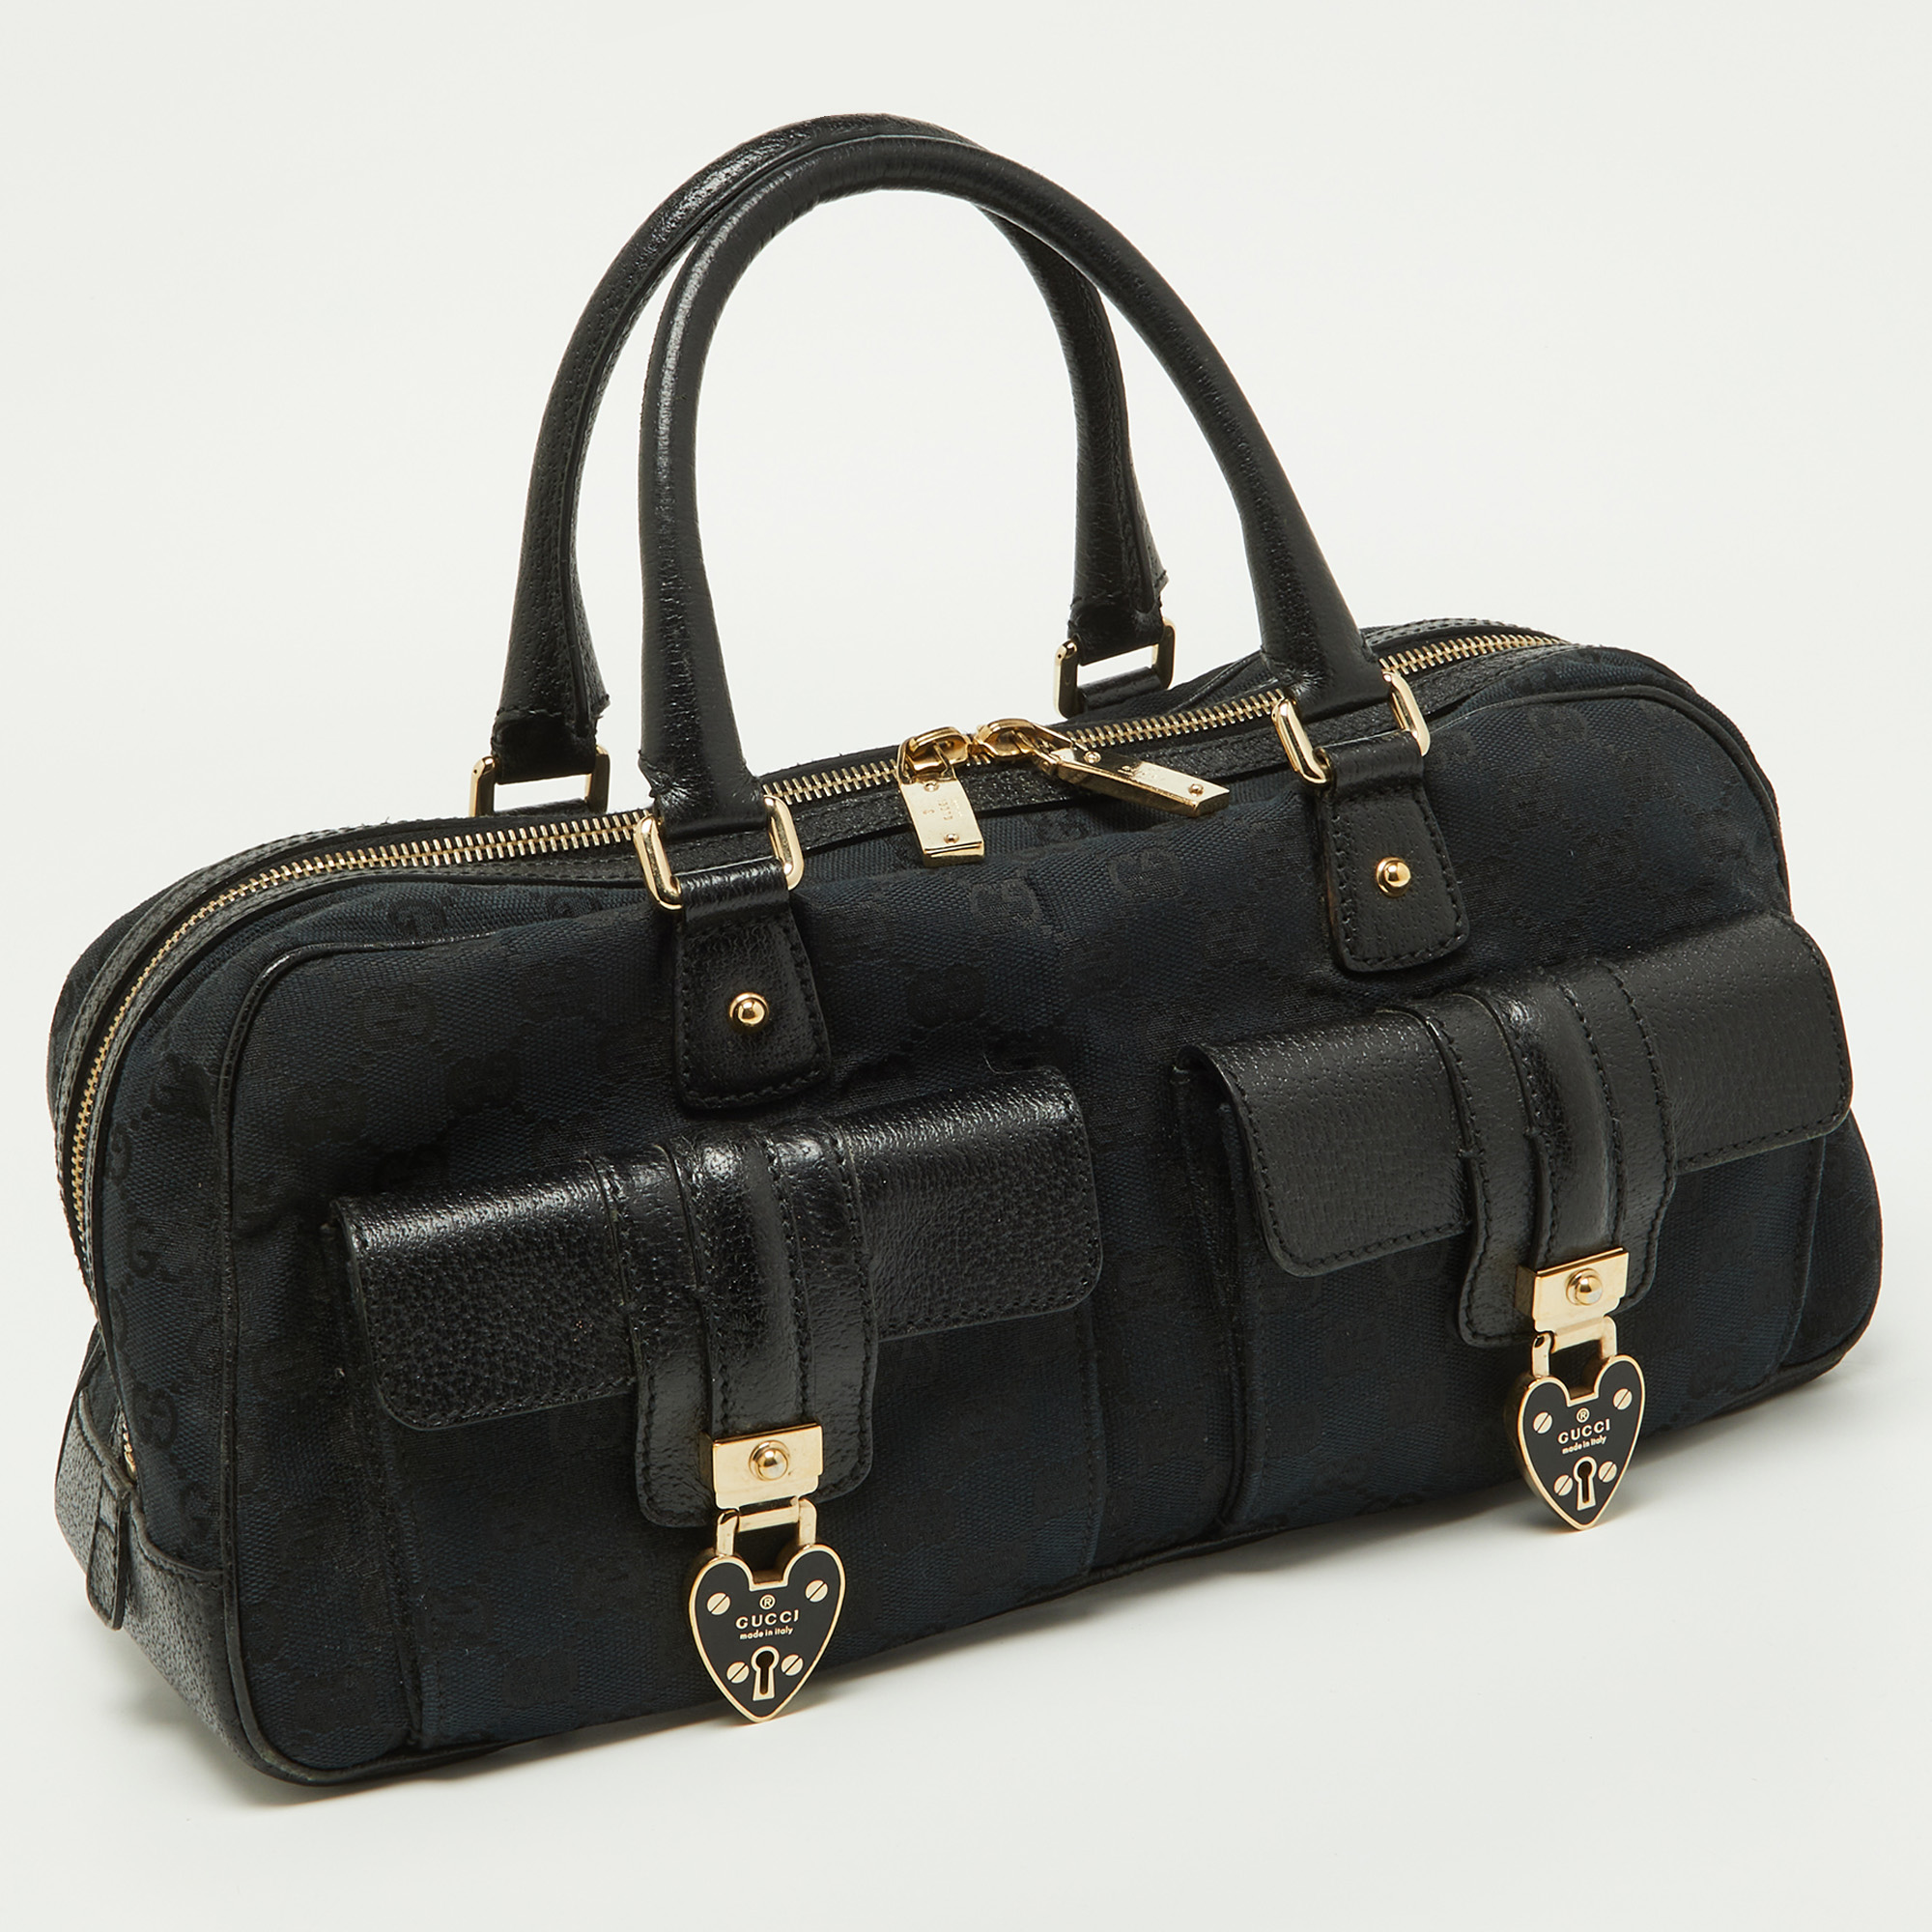 Gucci Black GG Canvas And Leather Heart Lock Satchel